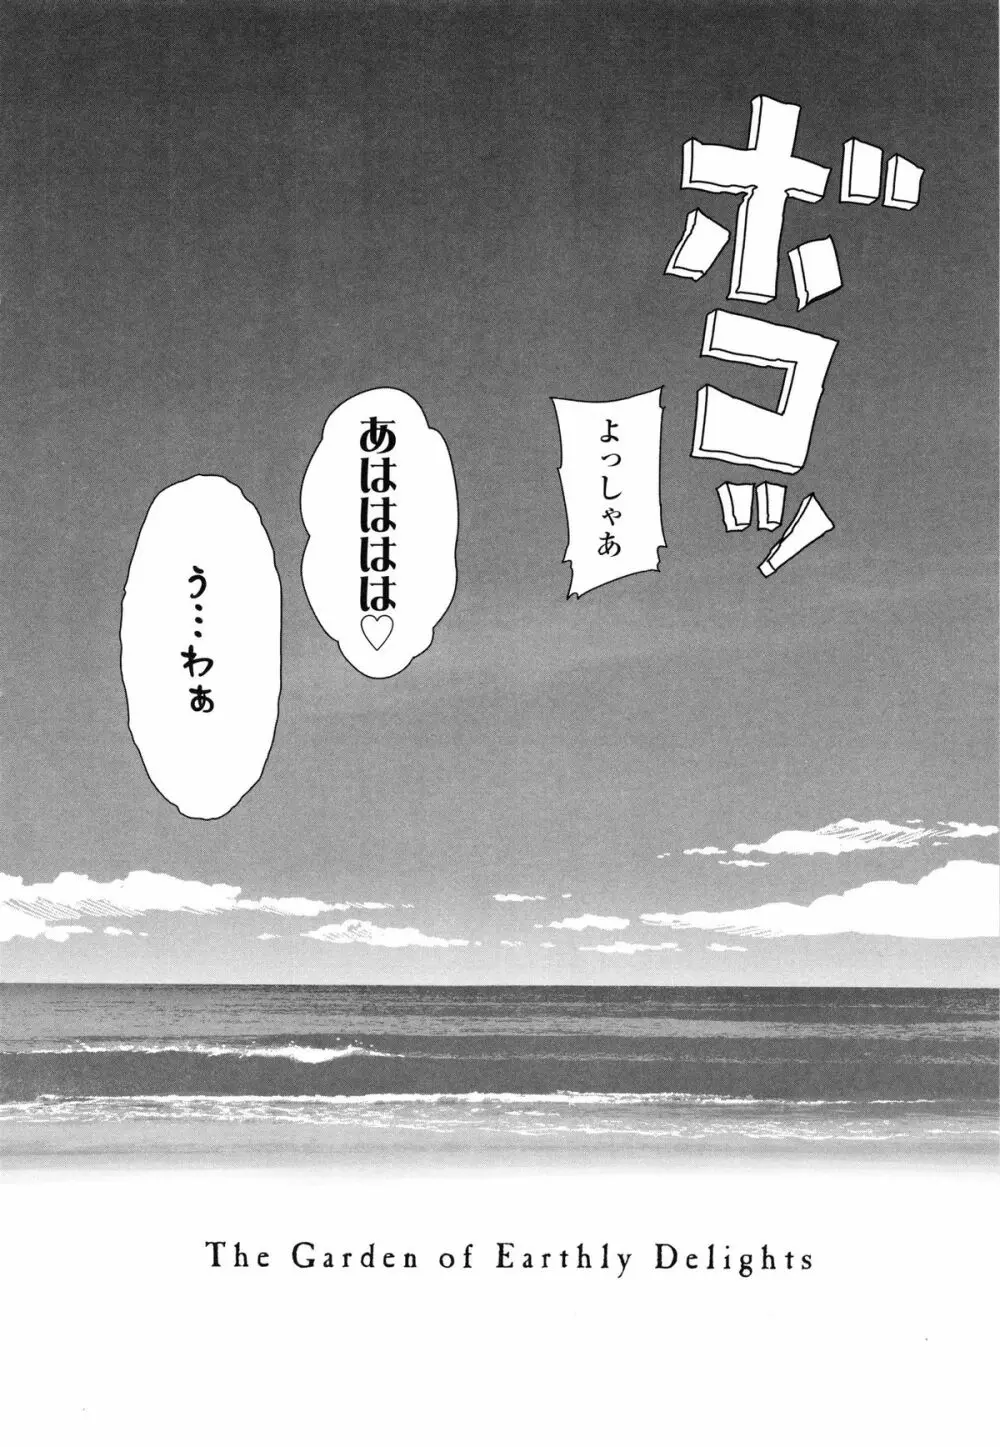 Japanese Preteen Suite Page.158